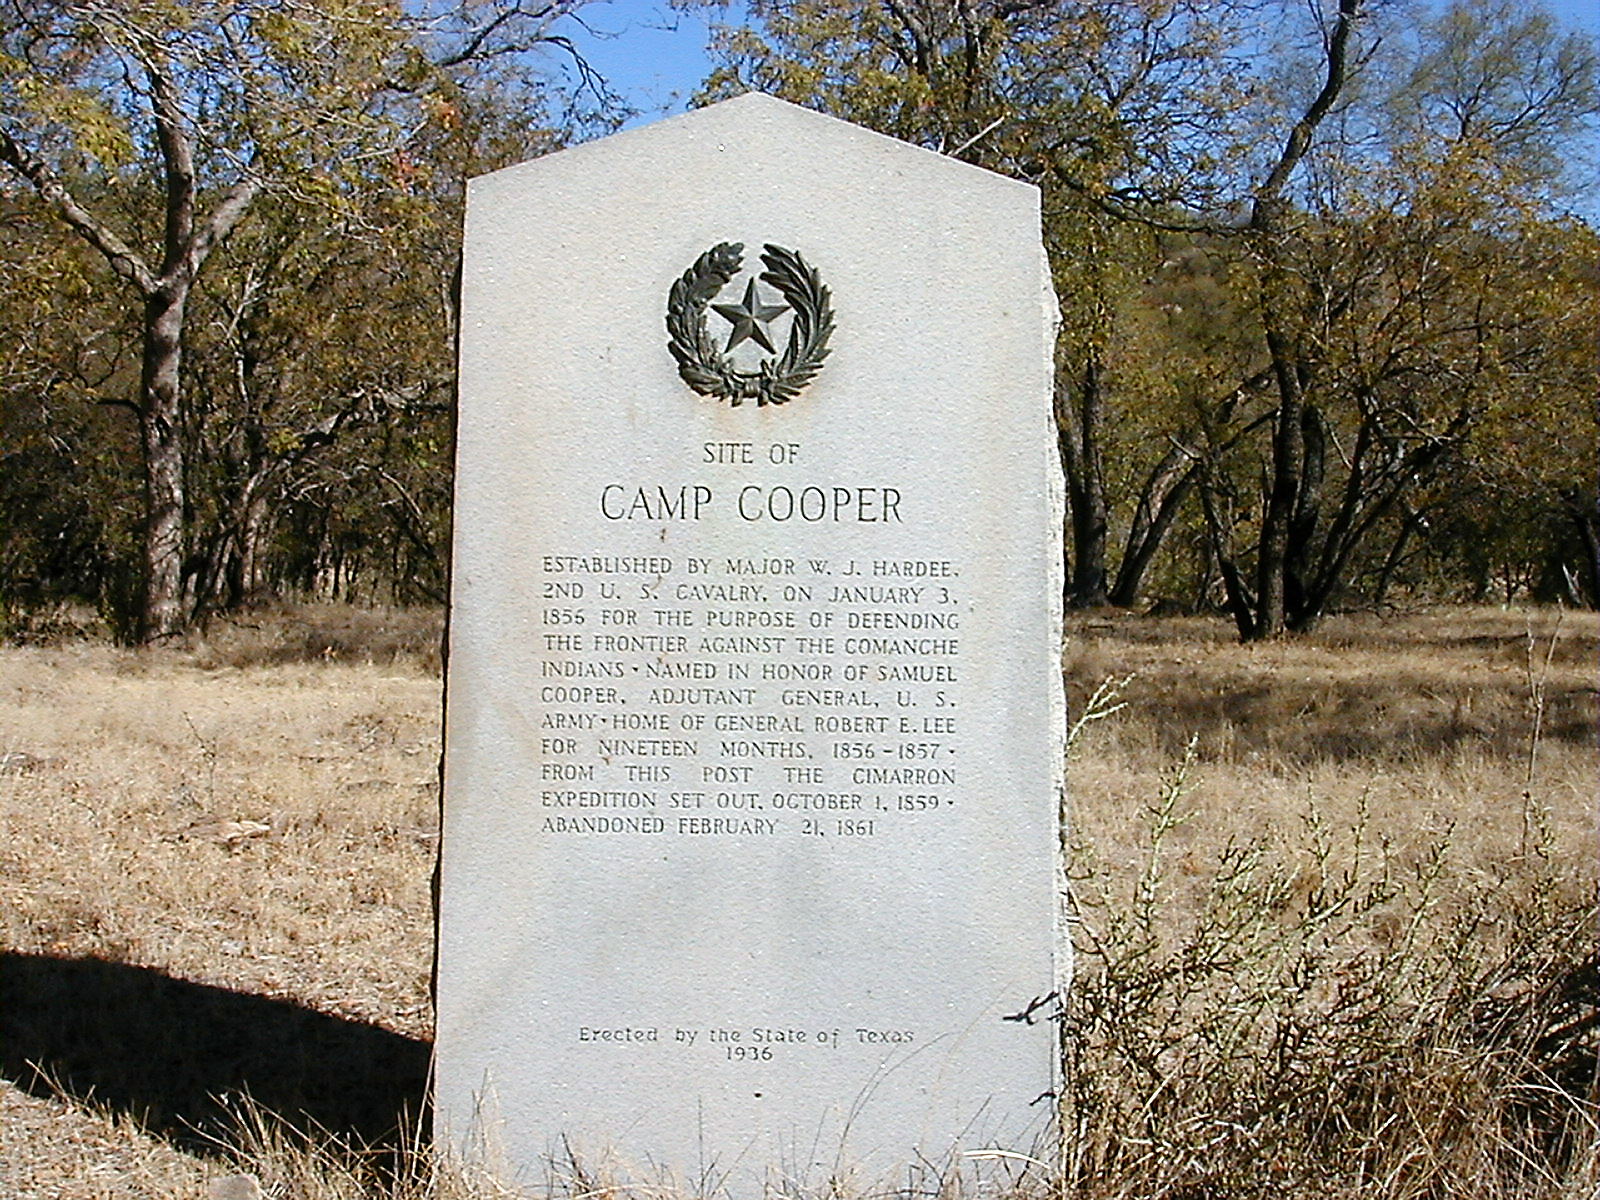 Site of Camp Cooper tablet stone